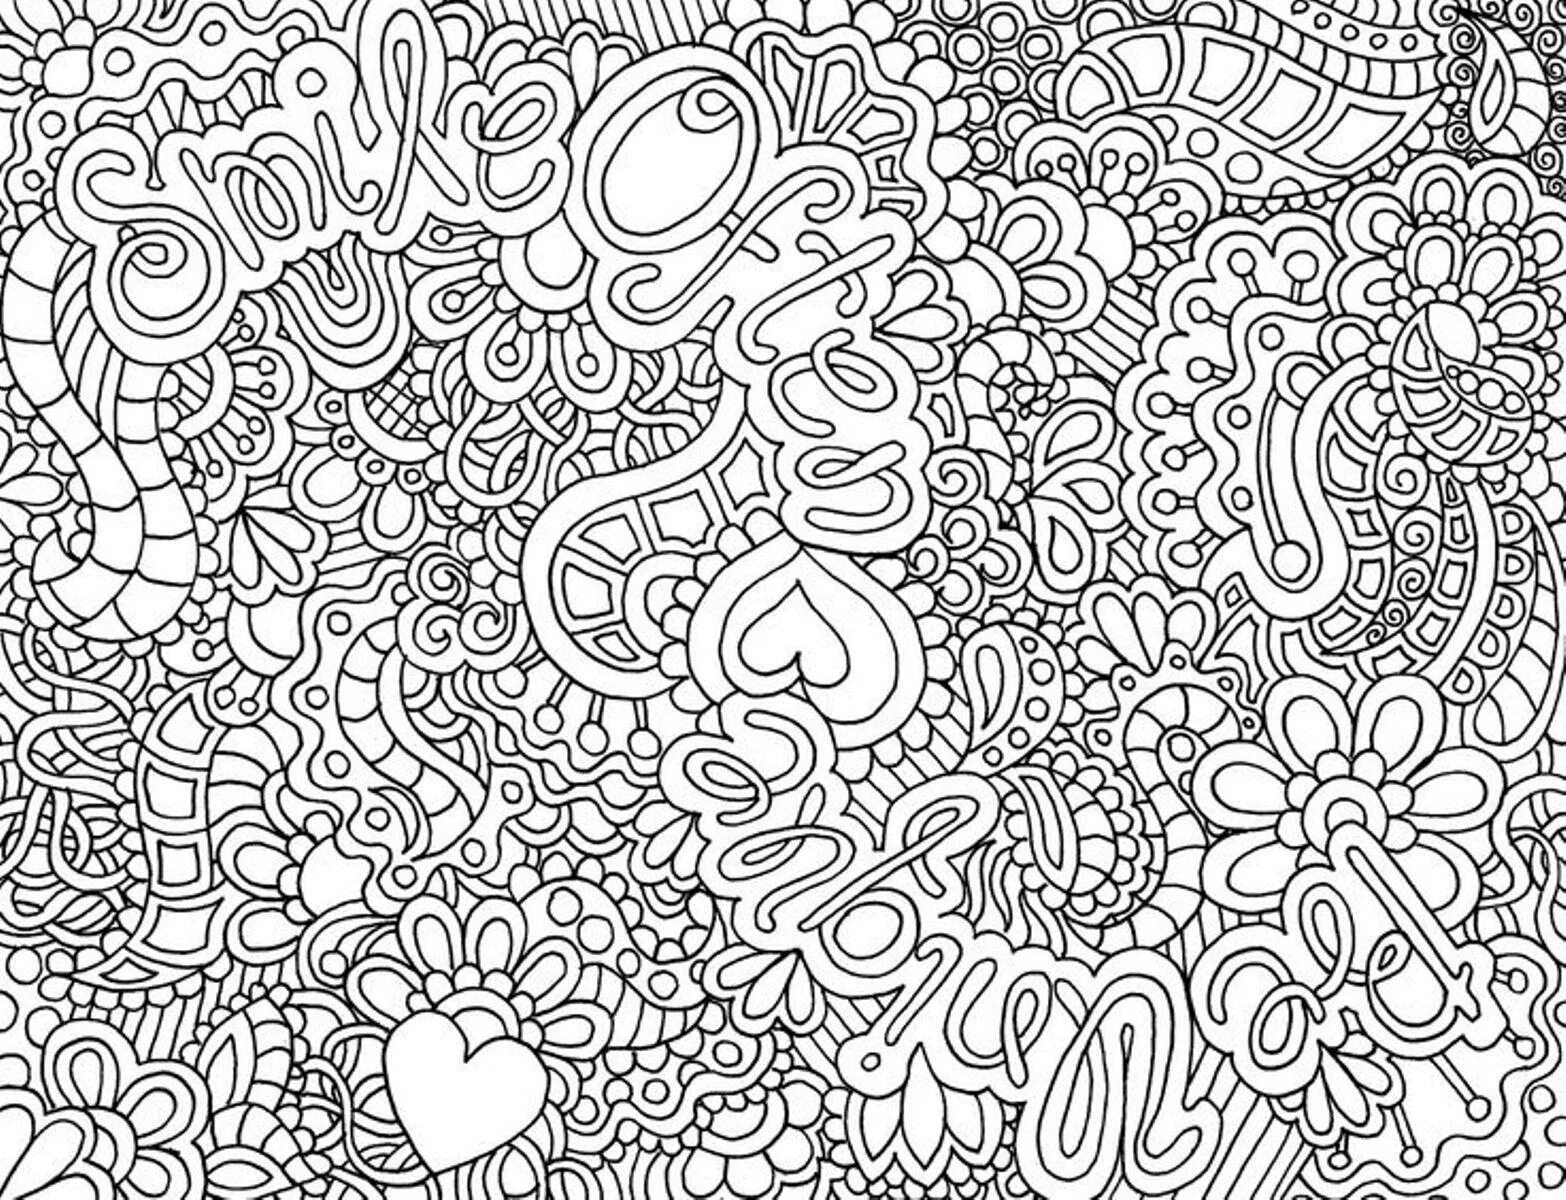 Playful coloring for adults